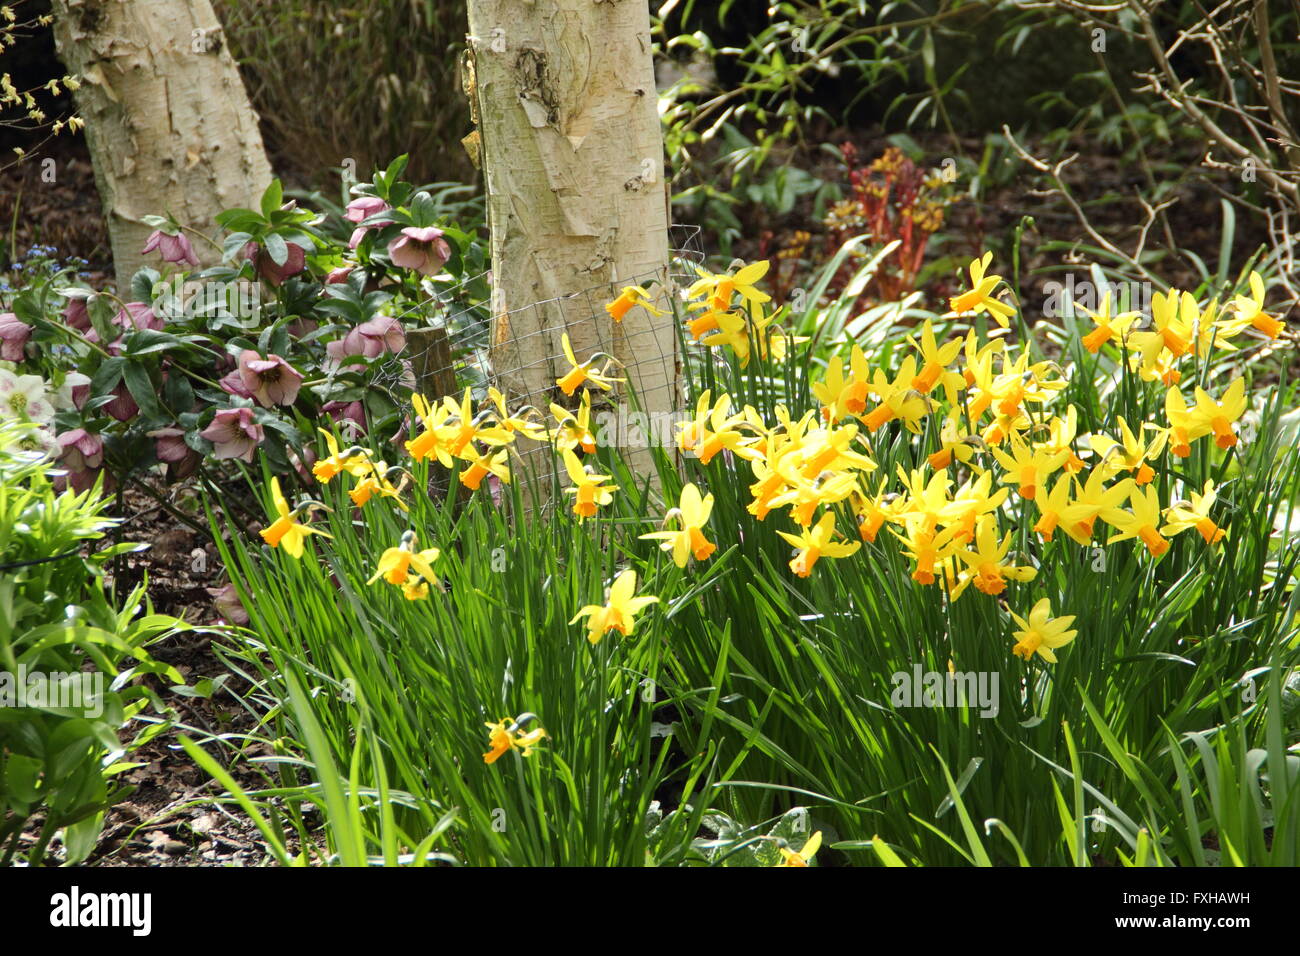 Silver birch (betula pendula) underplanted with daffodils (narcissus) and hellebores in an English country garden, UK - spring Stock Photo